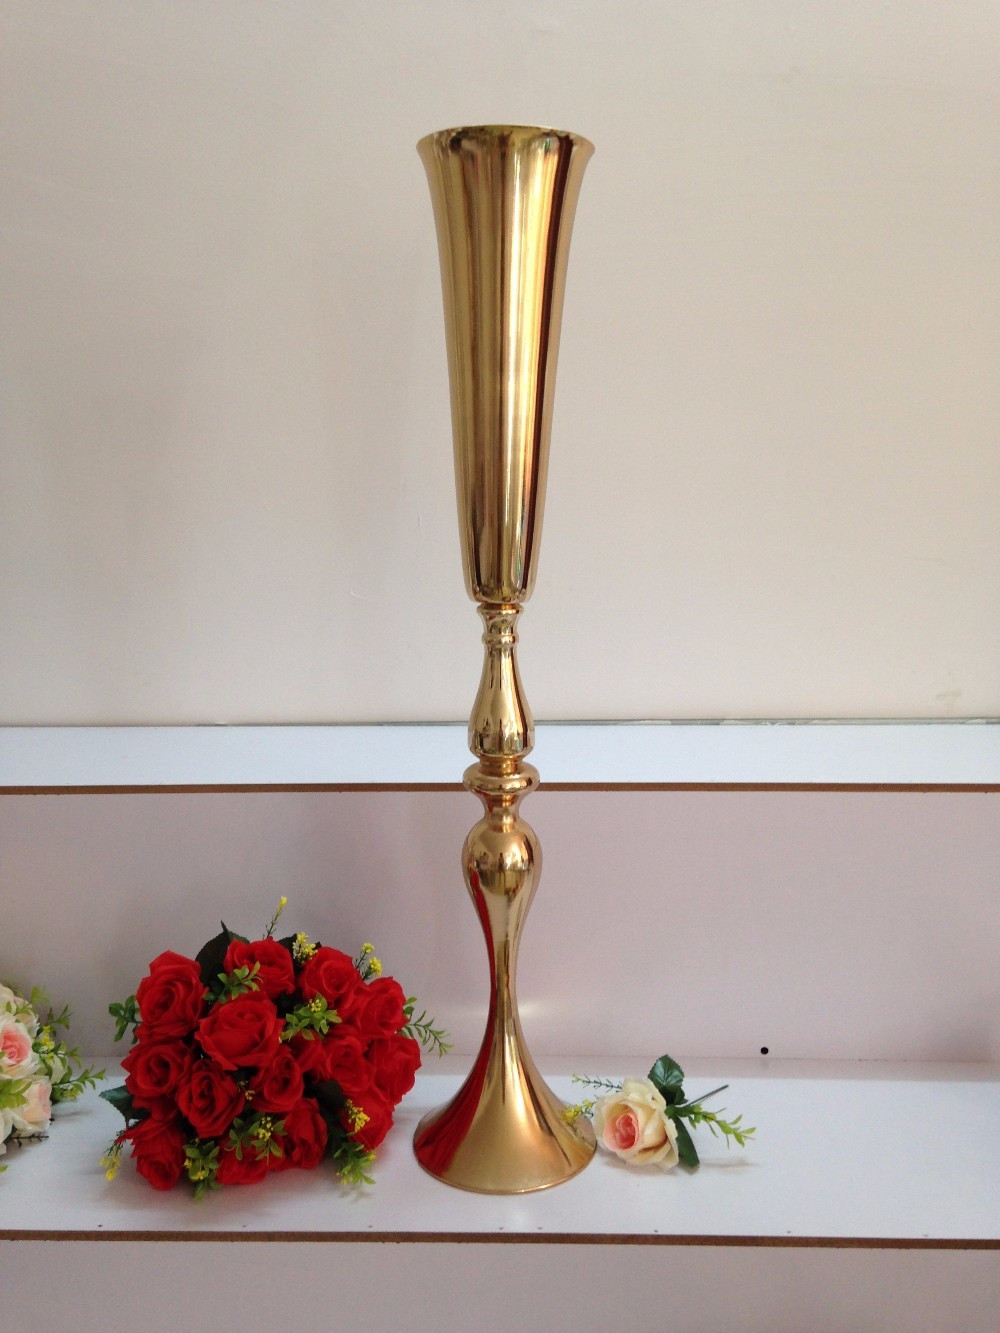 29 Trendy Big Gold Vase 2024 free download big gold vase of aliexpress com buy gold table centerpiece wedding flower vase with regard to aliexpress com buy gold table centerpiece wedding flower vase wedding decoration 88cm tall 10pcs